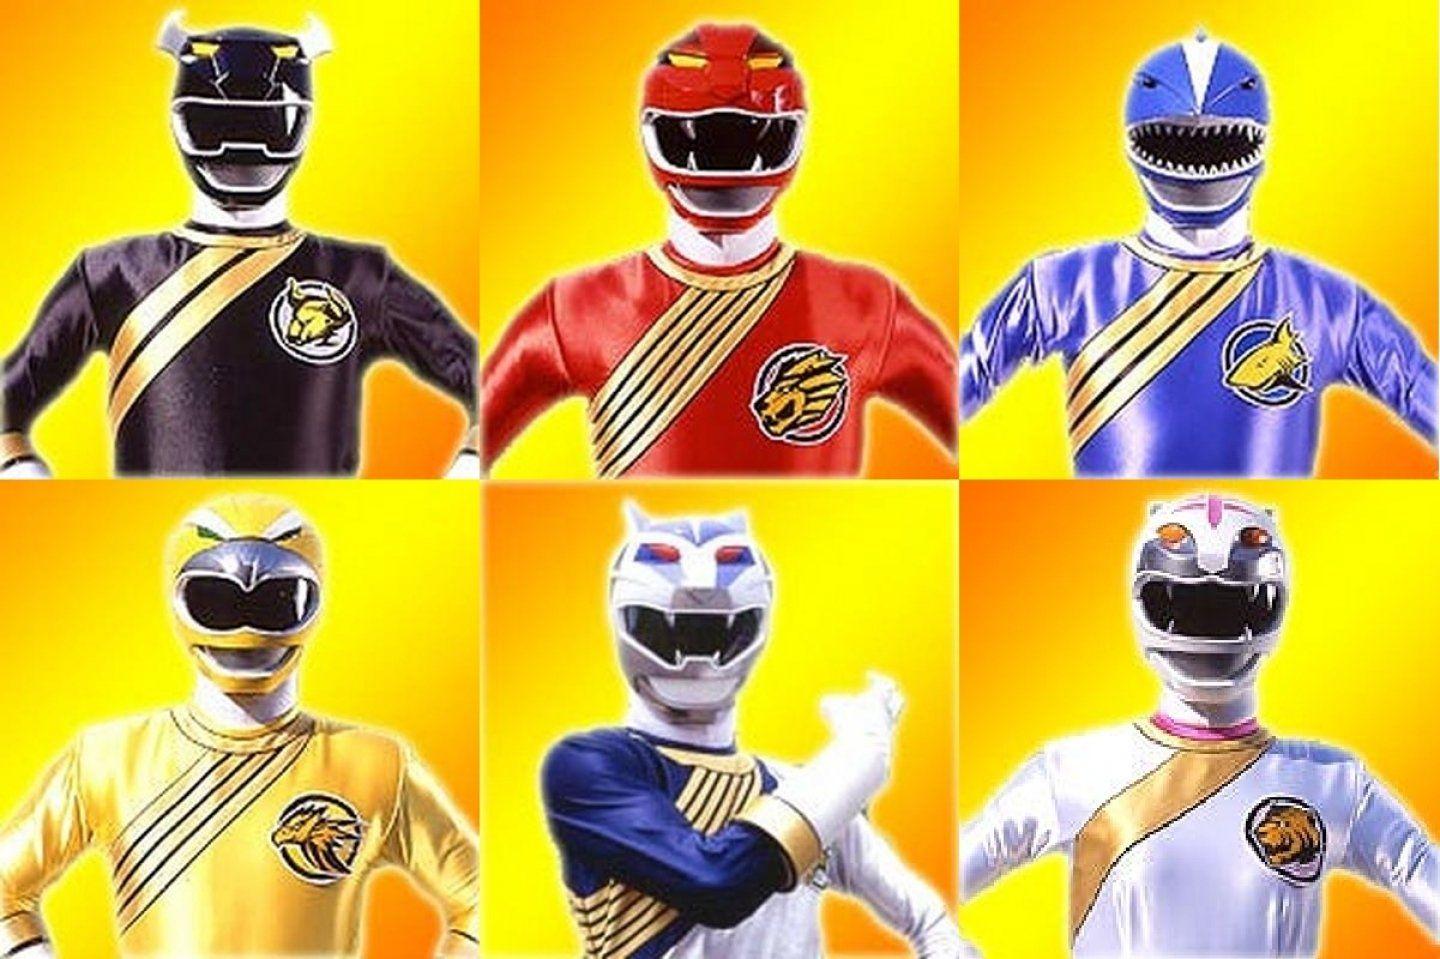 Power Rangers HD Wallpaper and Background Image